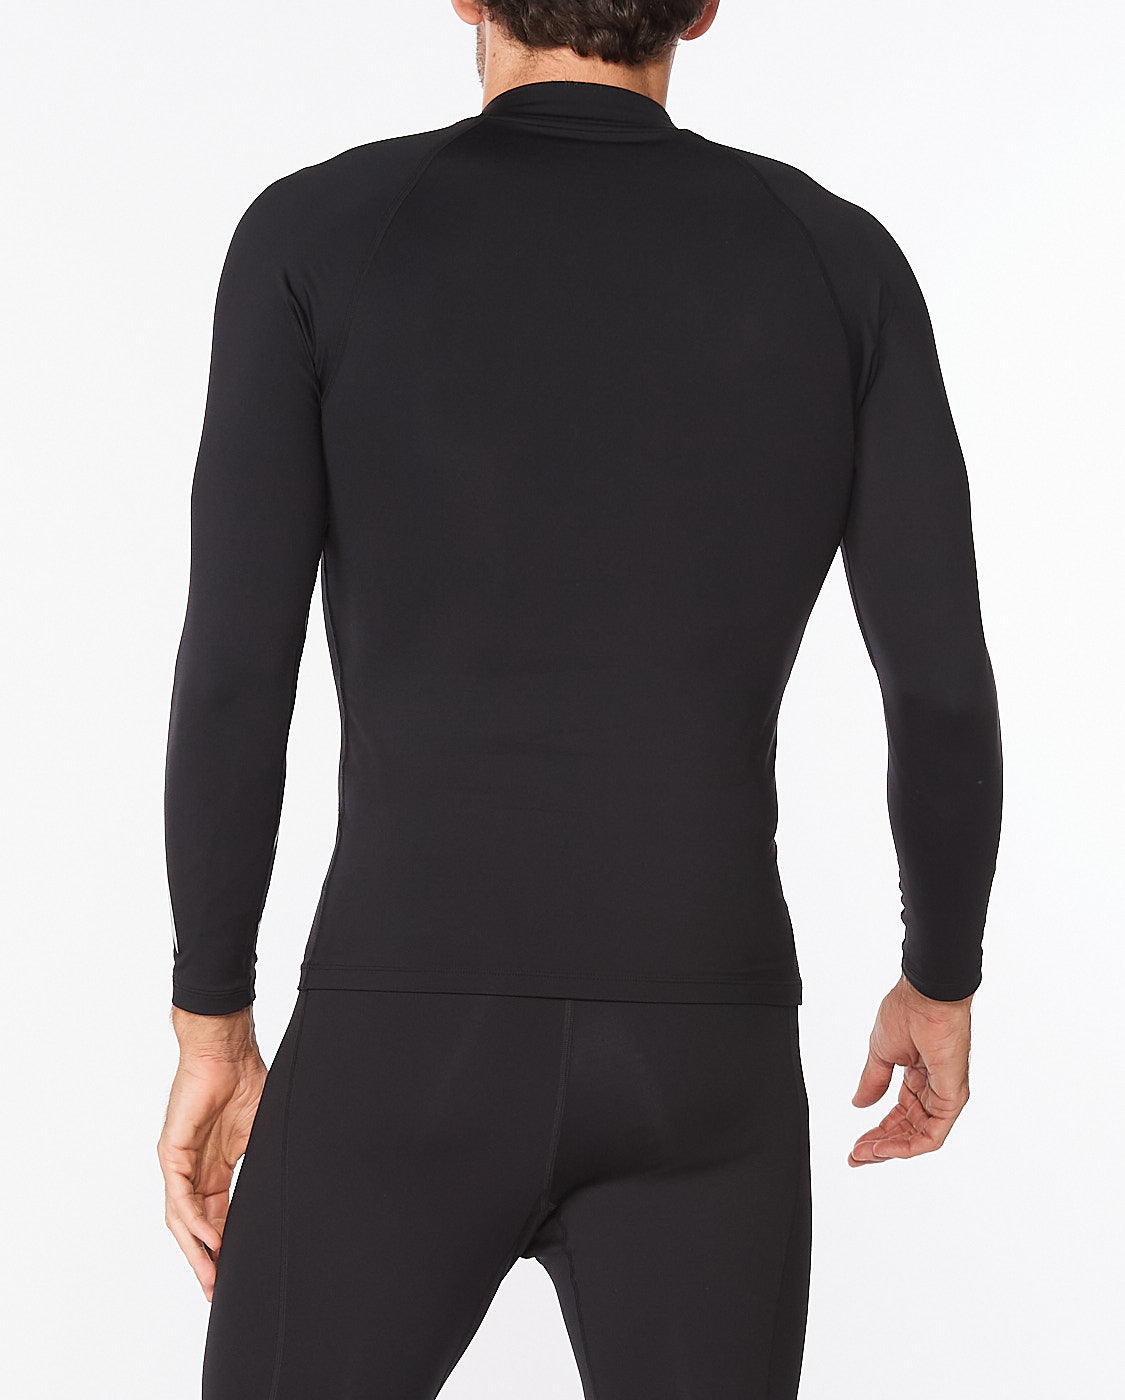 Ignition Compression Long Sleeve